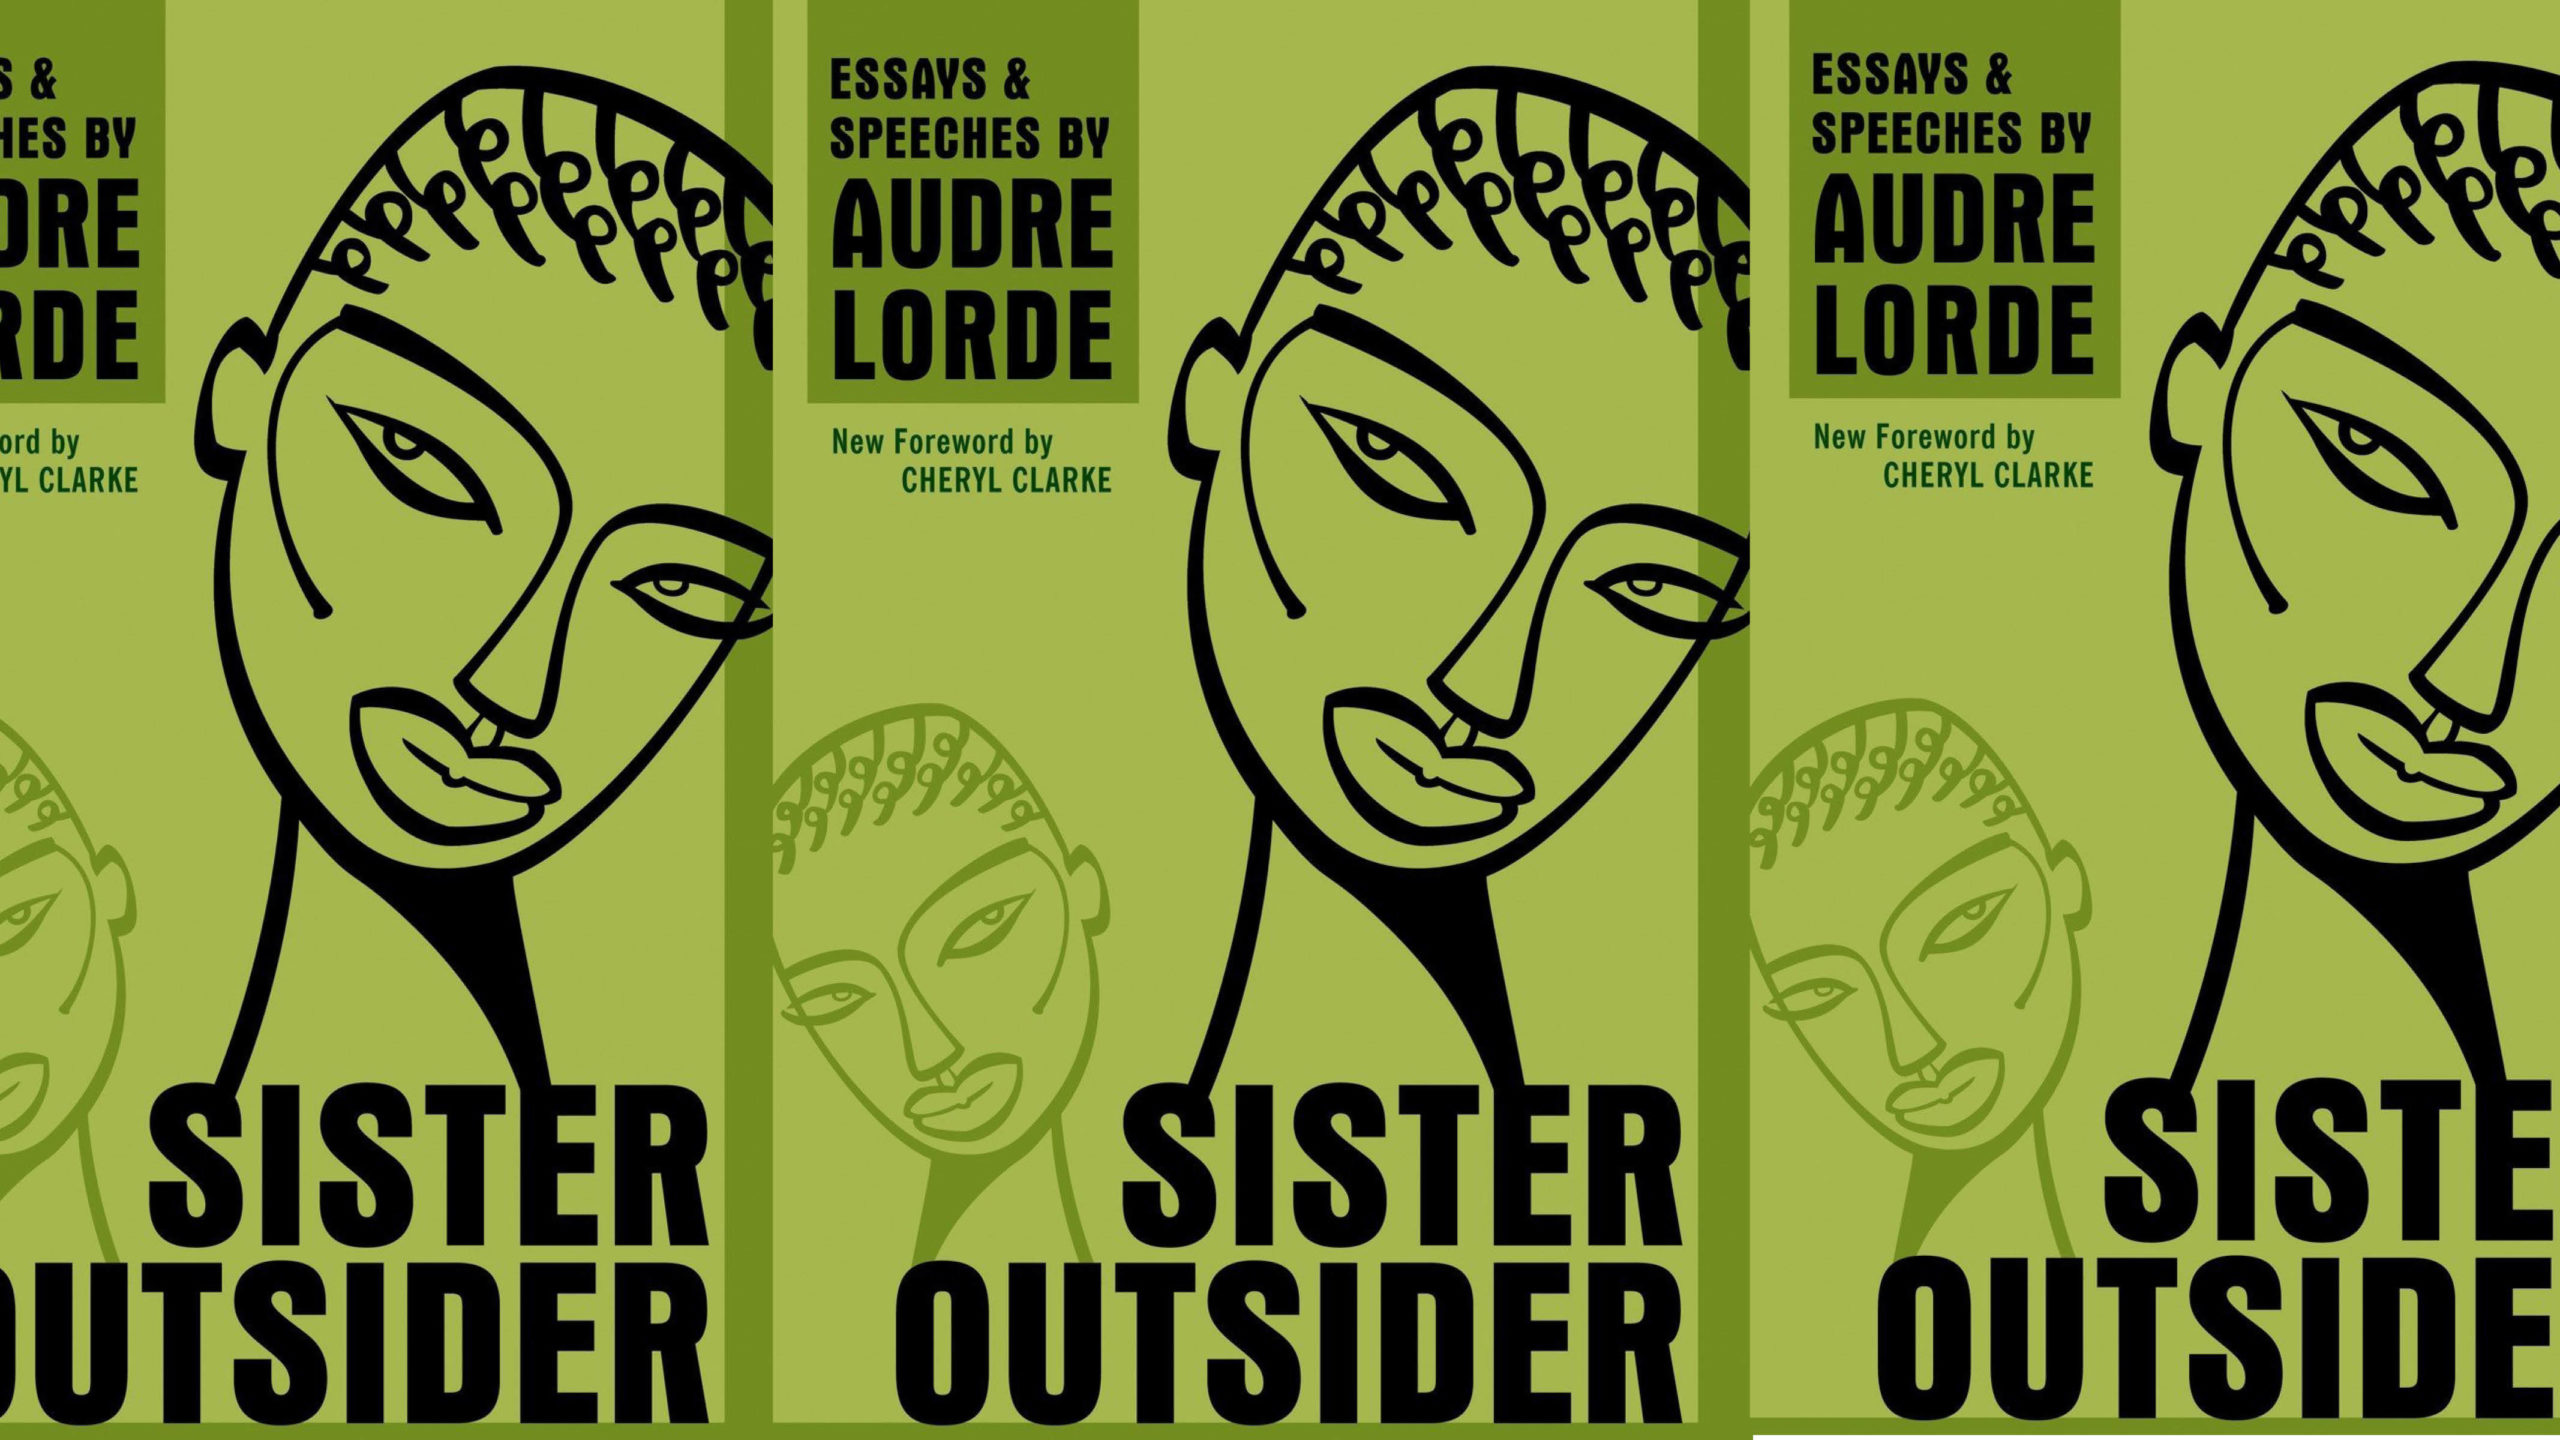 Sister Outsider by Audre Lorde